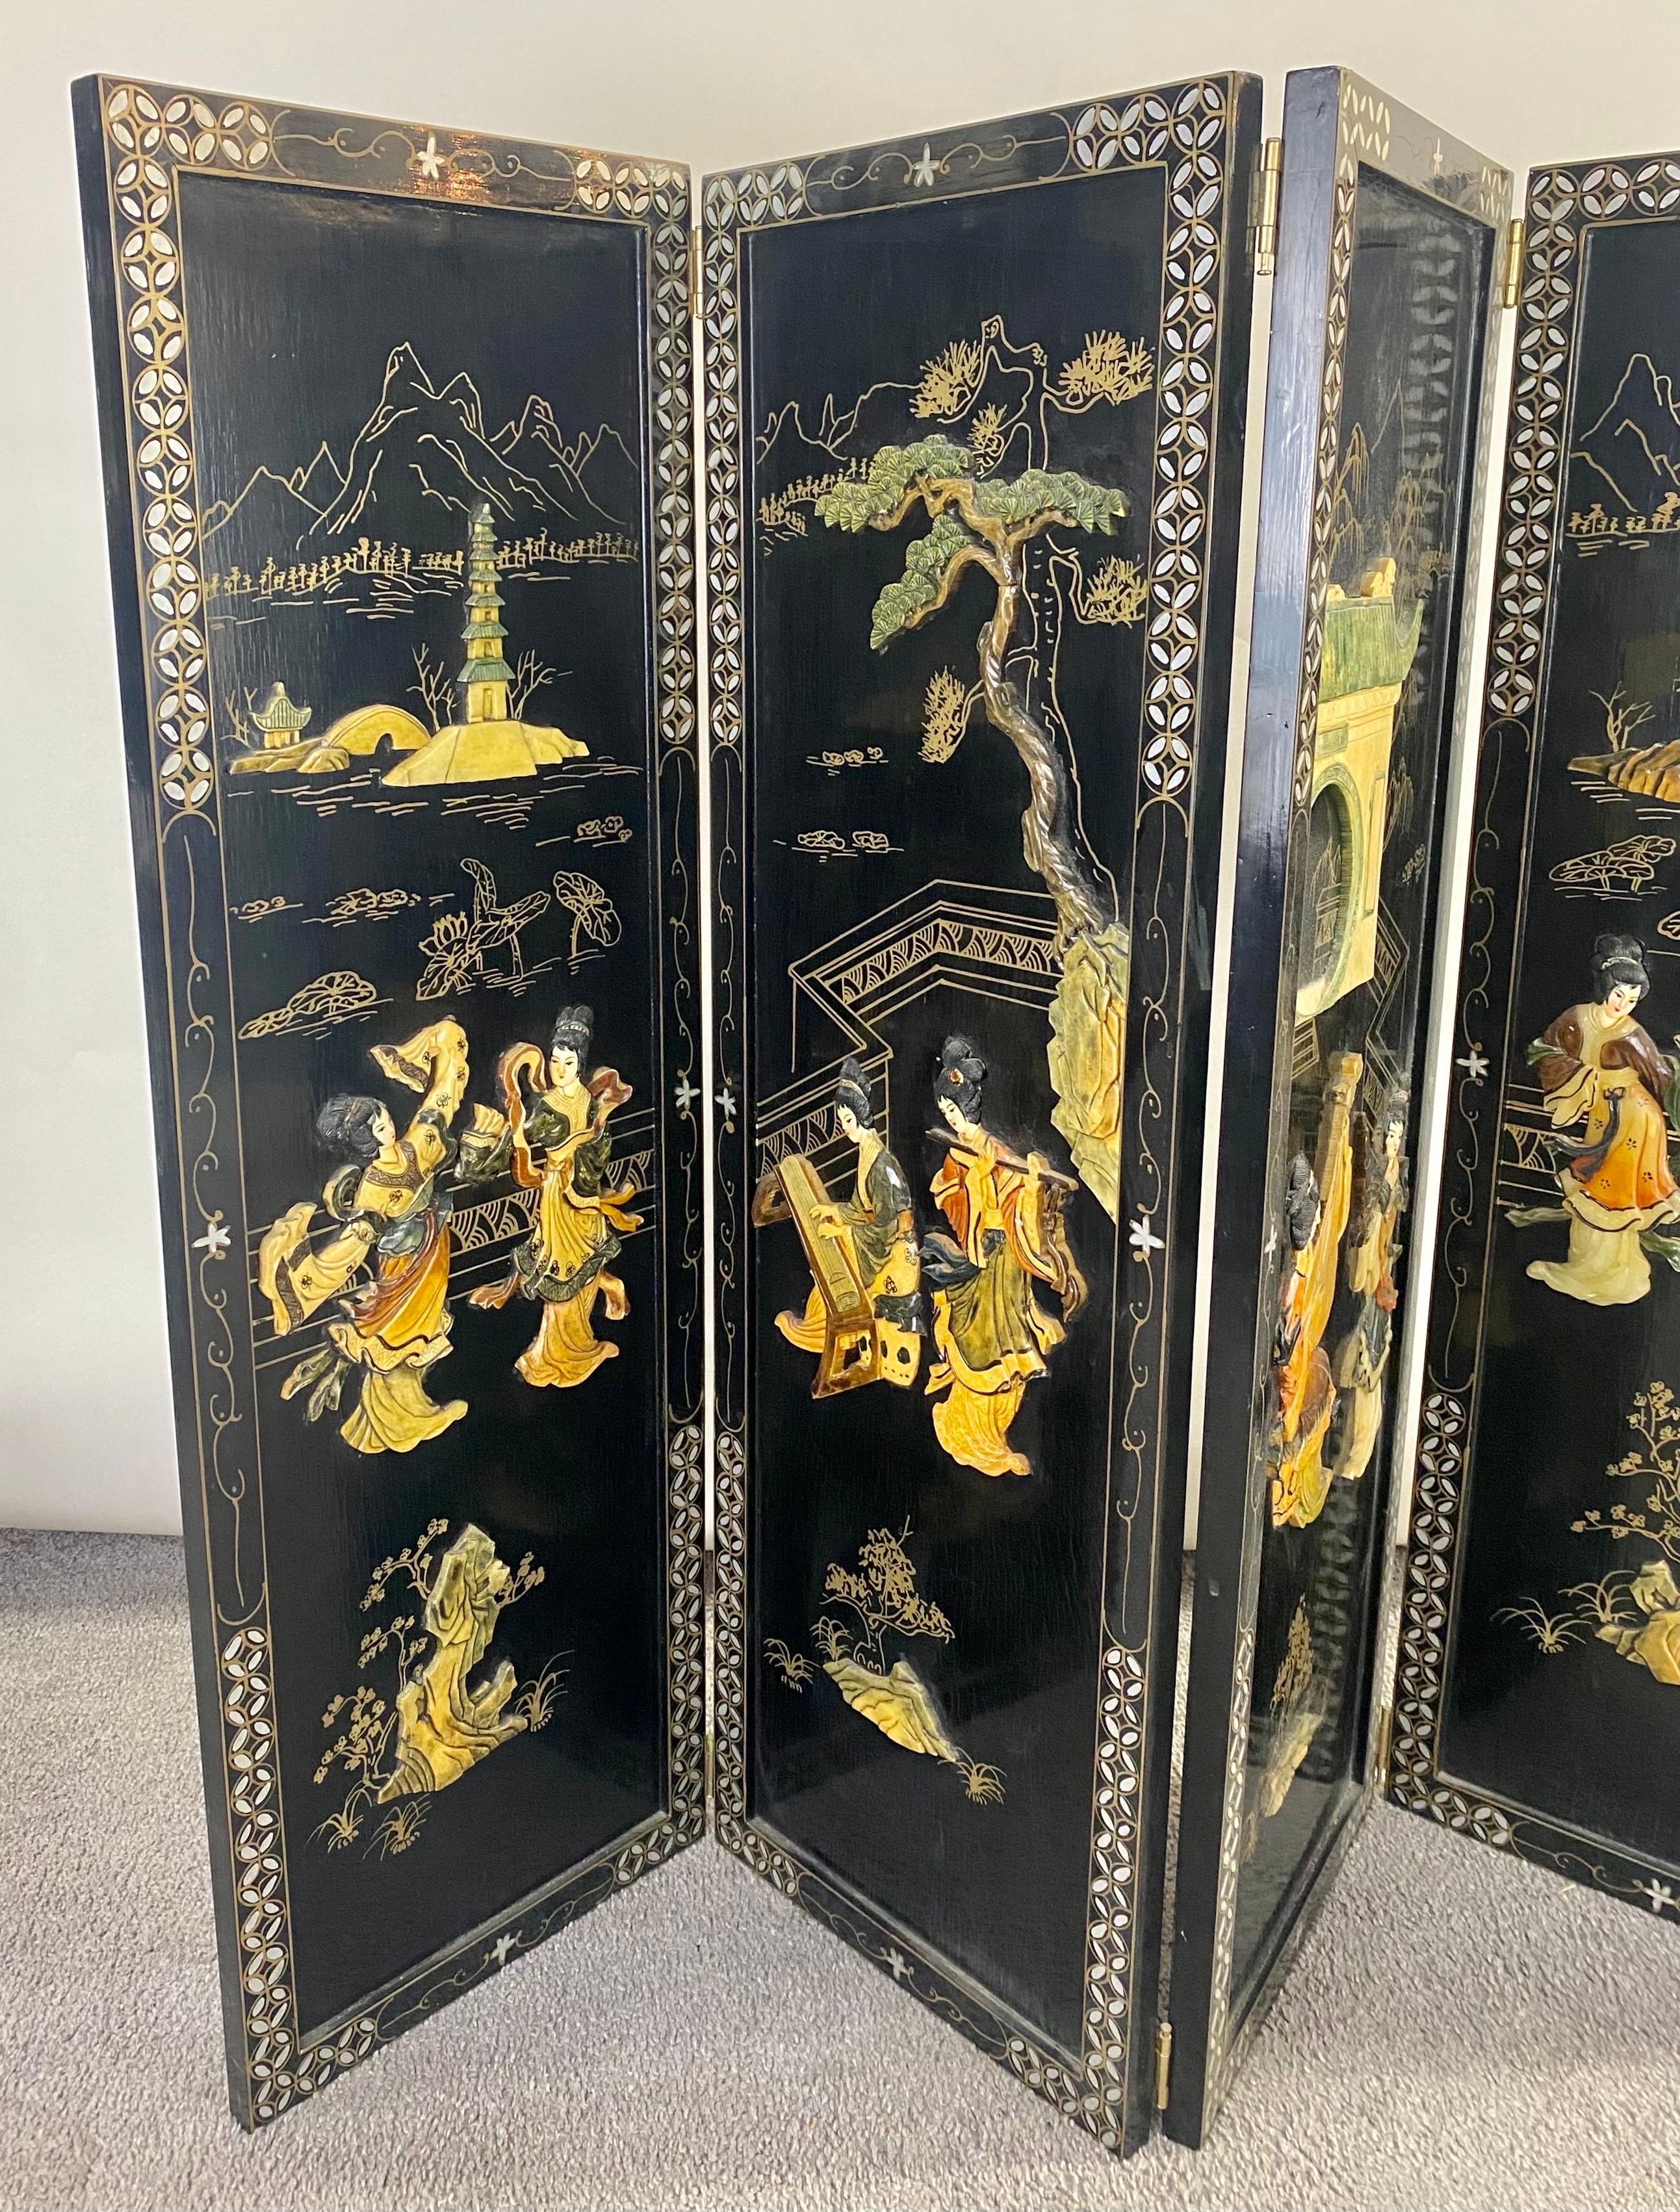 An exquisite vintage Chinese four panels decorative wall panel or screen.  The beautiful wall panel or screen depicts Chinese scenes of Gaisha girls dancing as well as gardens scenic views finely carved of soapstone and hand-painted on a black